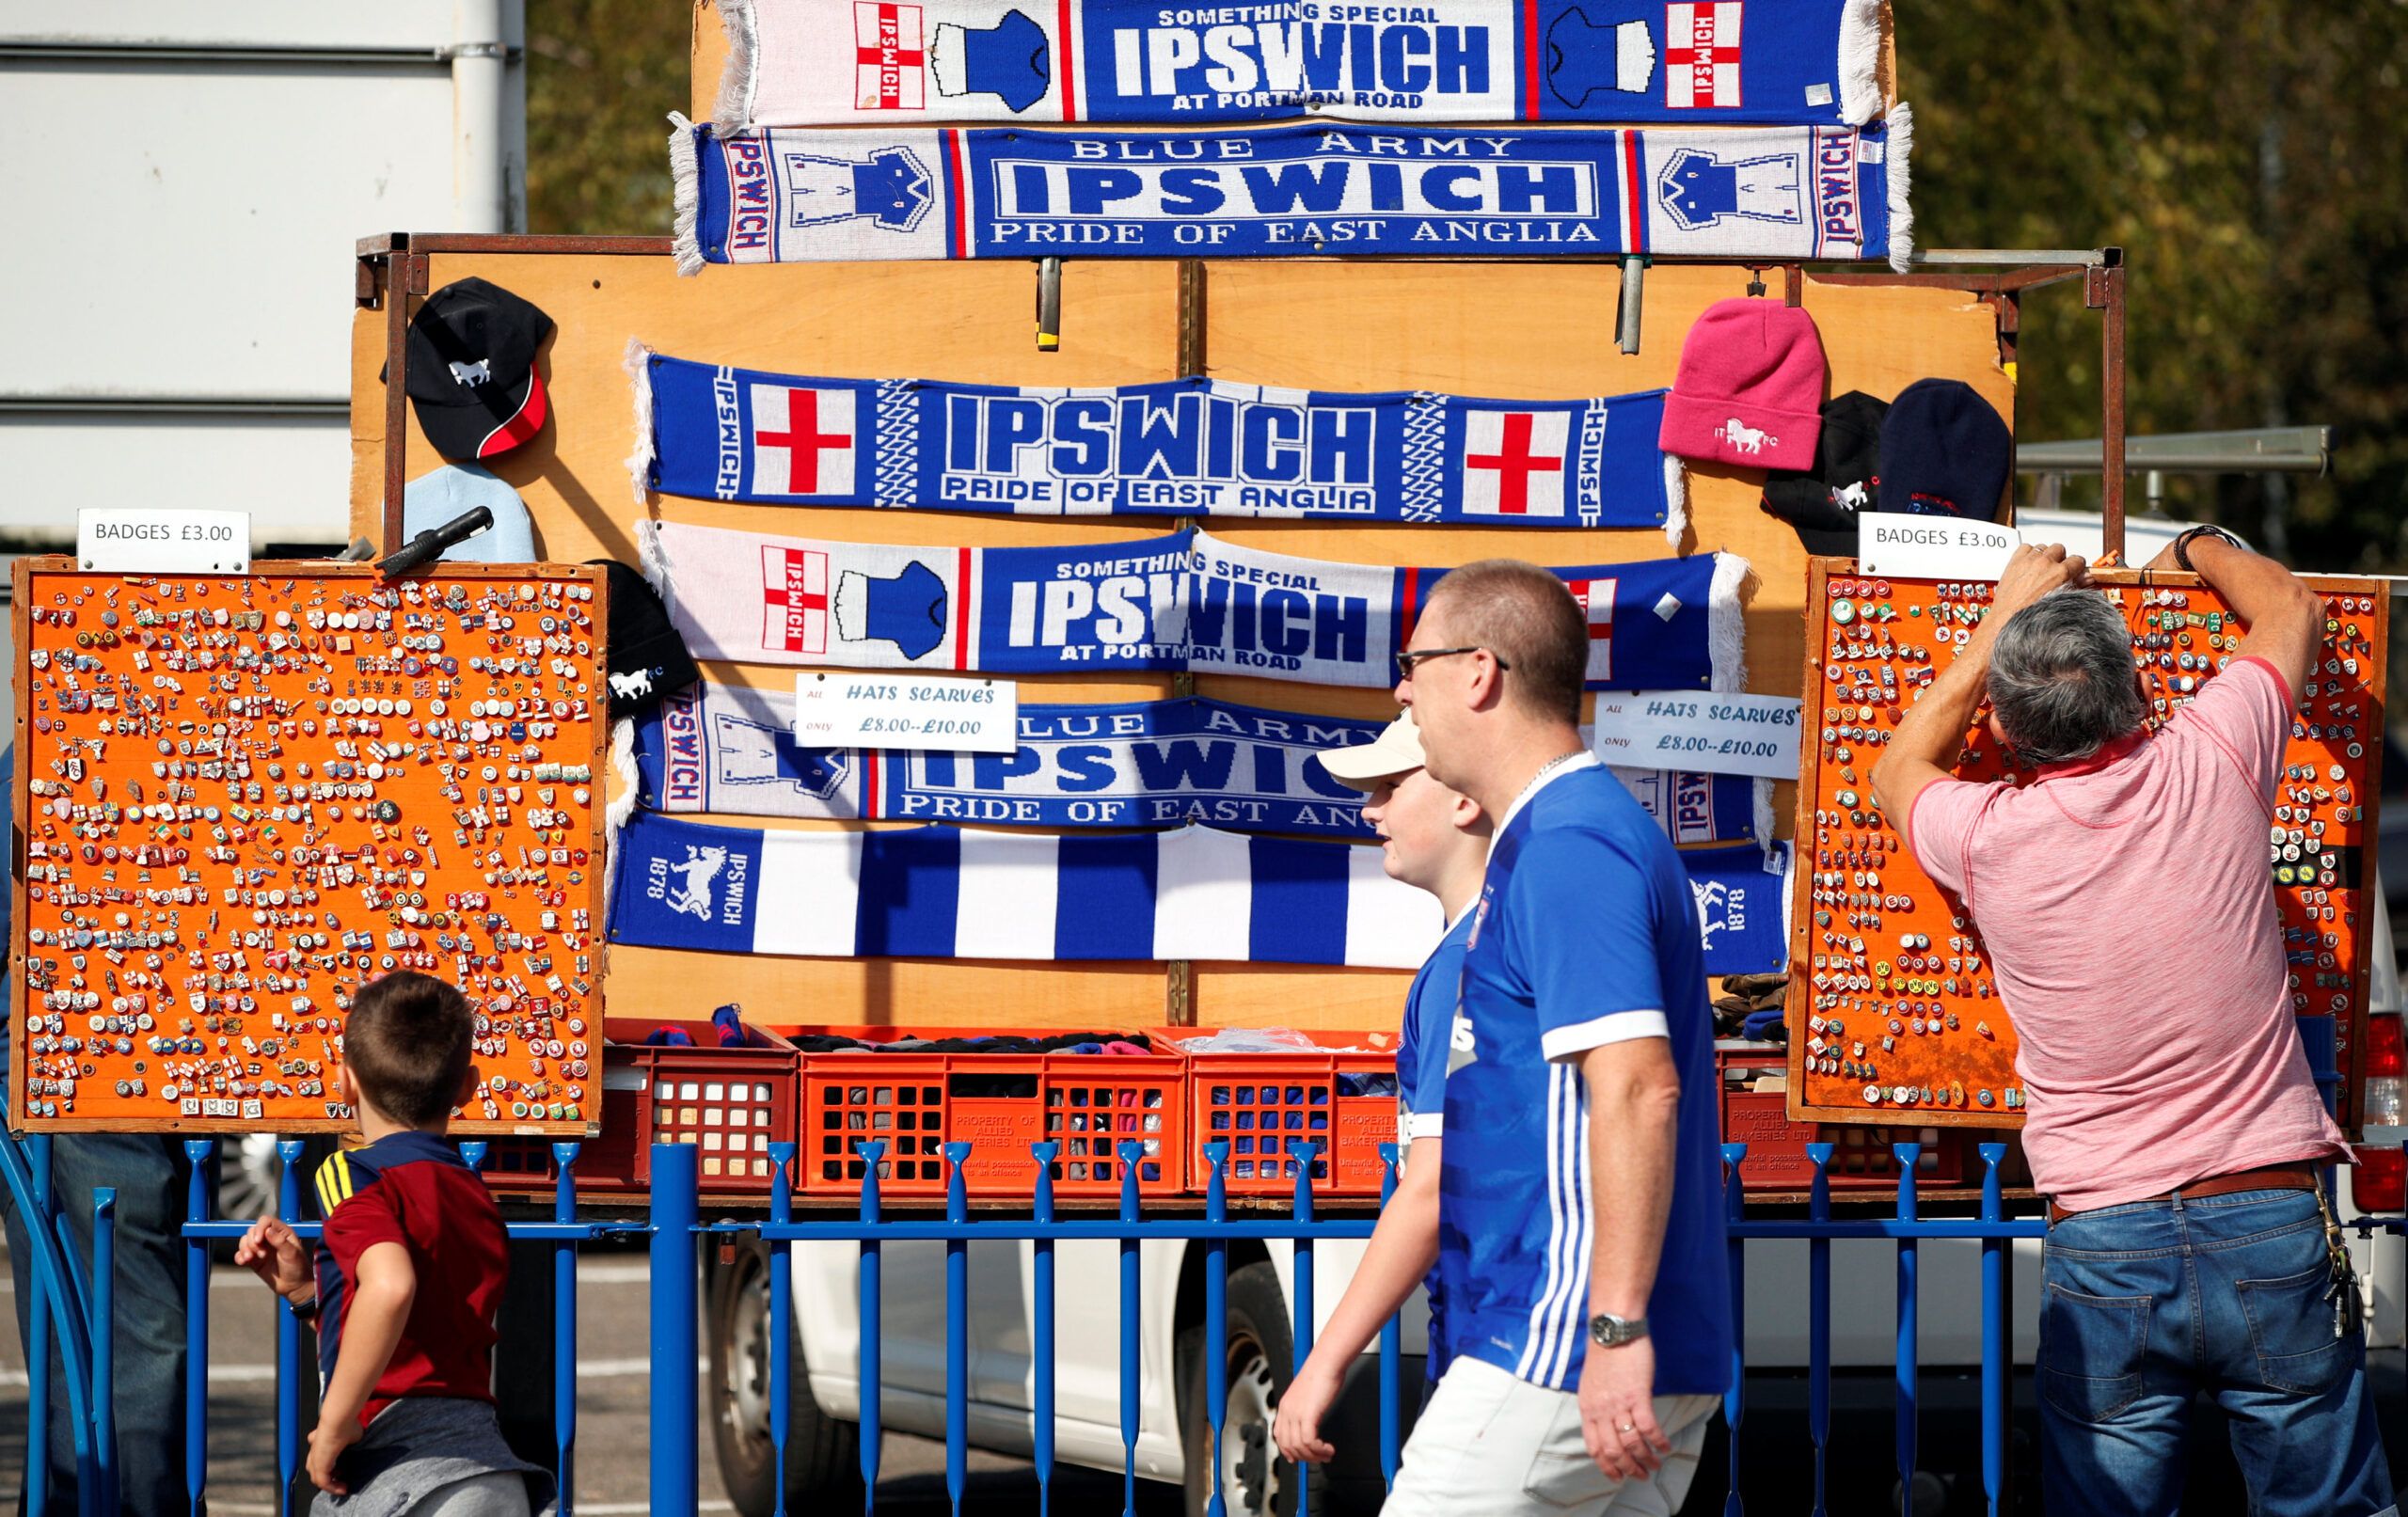 Soccer Football - Championship - Ipswich Town v Norwich City - Portman Road, Ipswich, Britain - September 2, 2018  Ipswich Town fans arrive for the match  Action Images/John Sibley  EDITORIAL USE ONLY. No use with unauthorized audio, video, data, fixture lists, club/league logos or 